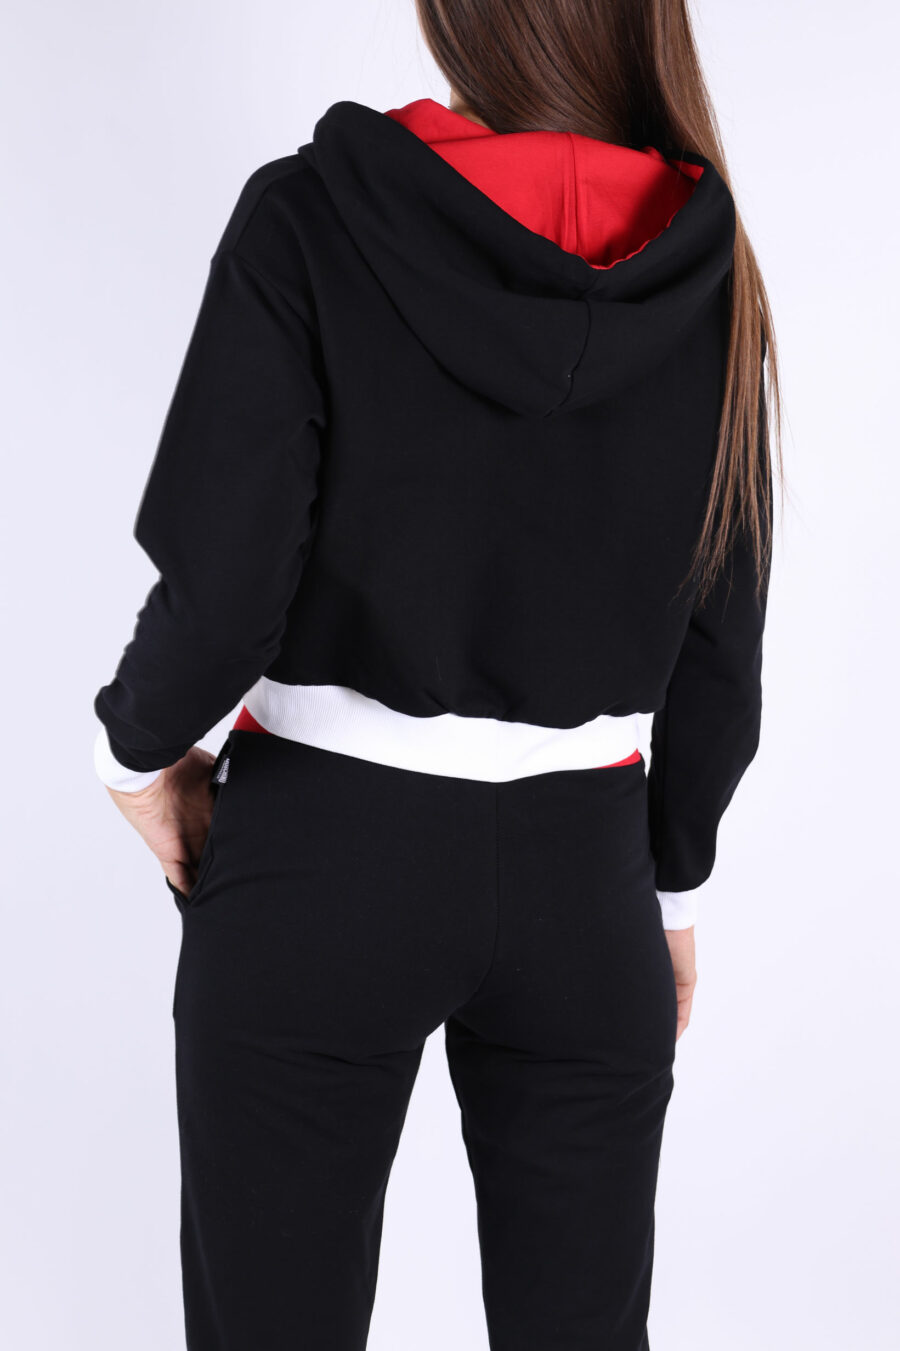 Black and red sweatshirt with hood and bear logo "underbear" patch - 361223054662202227